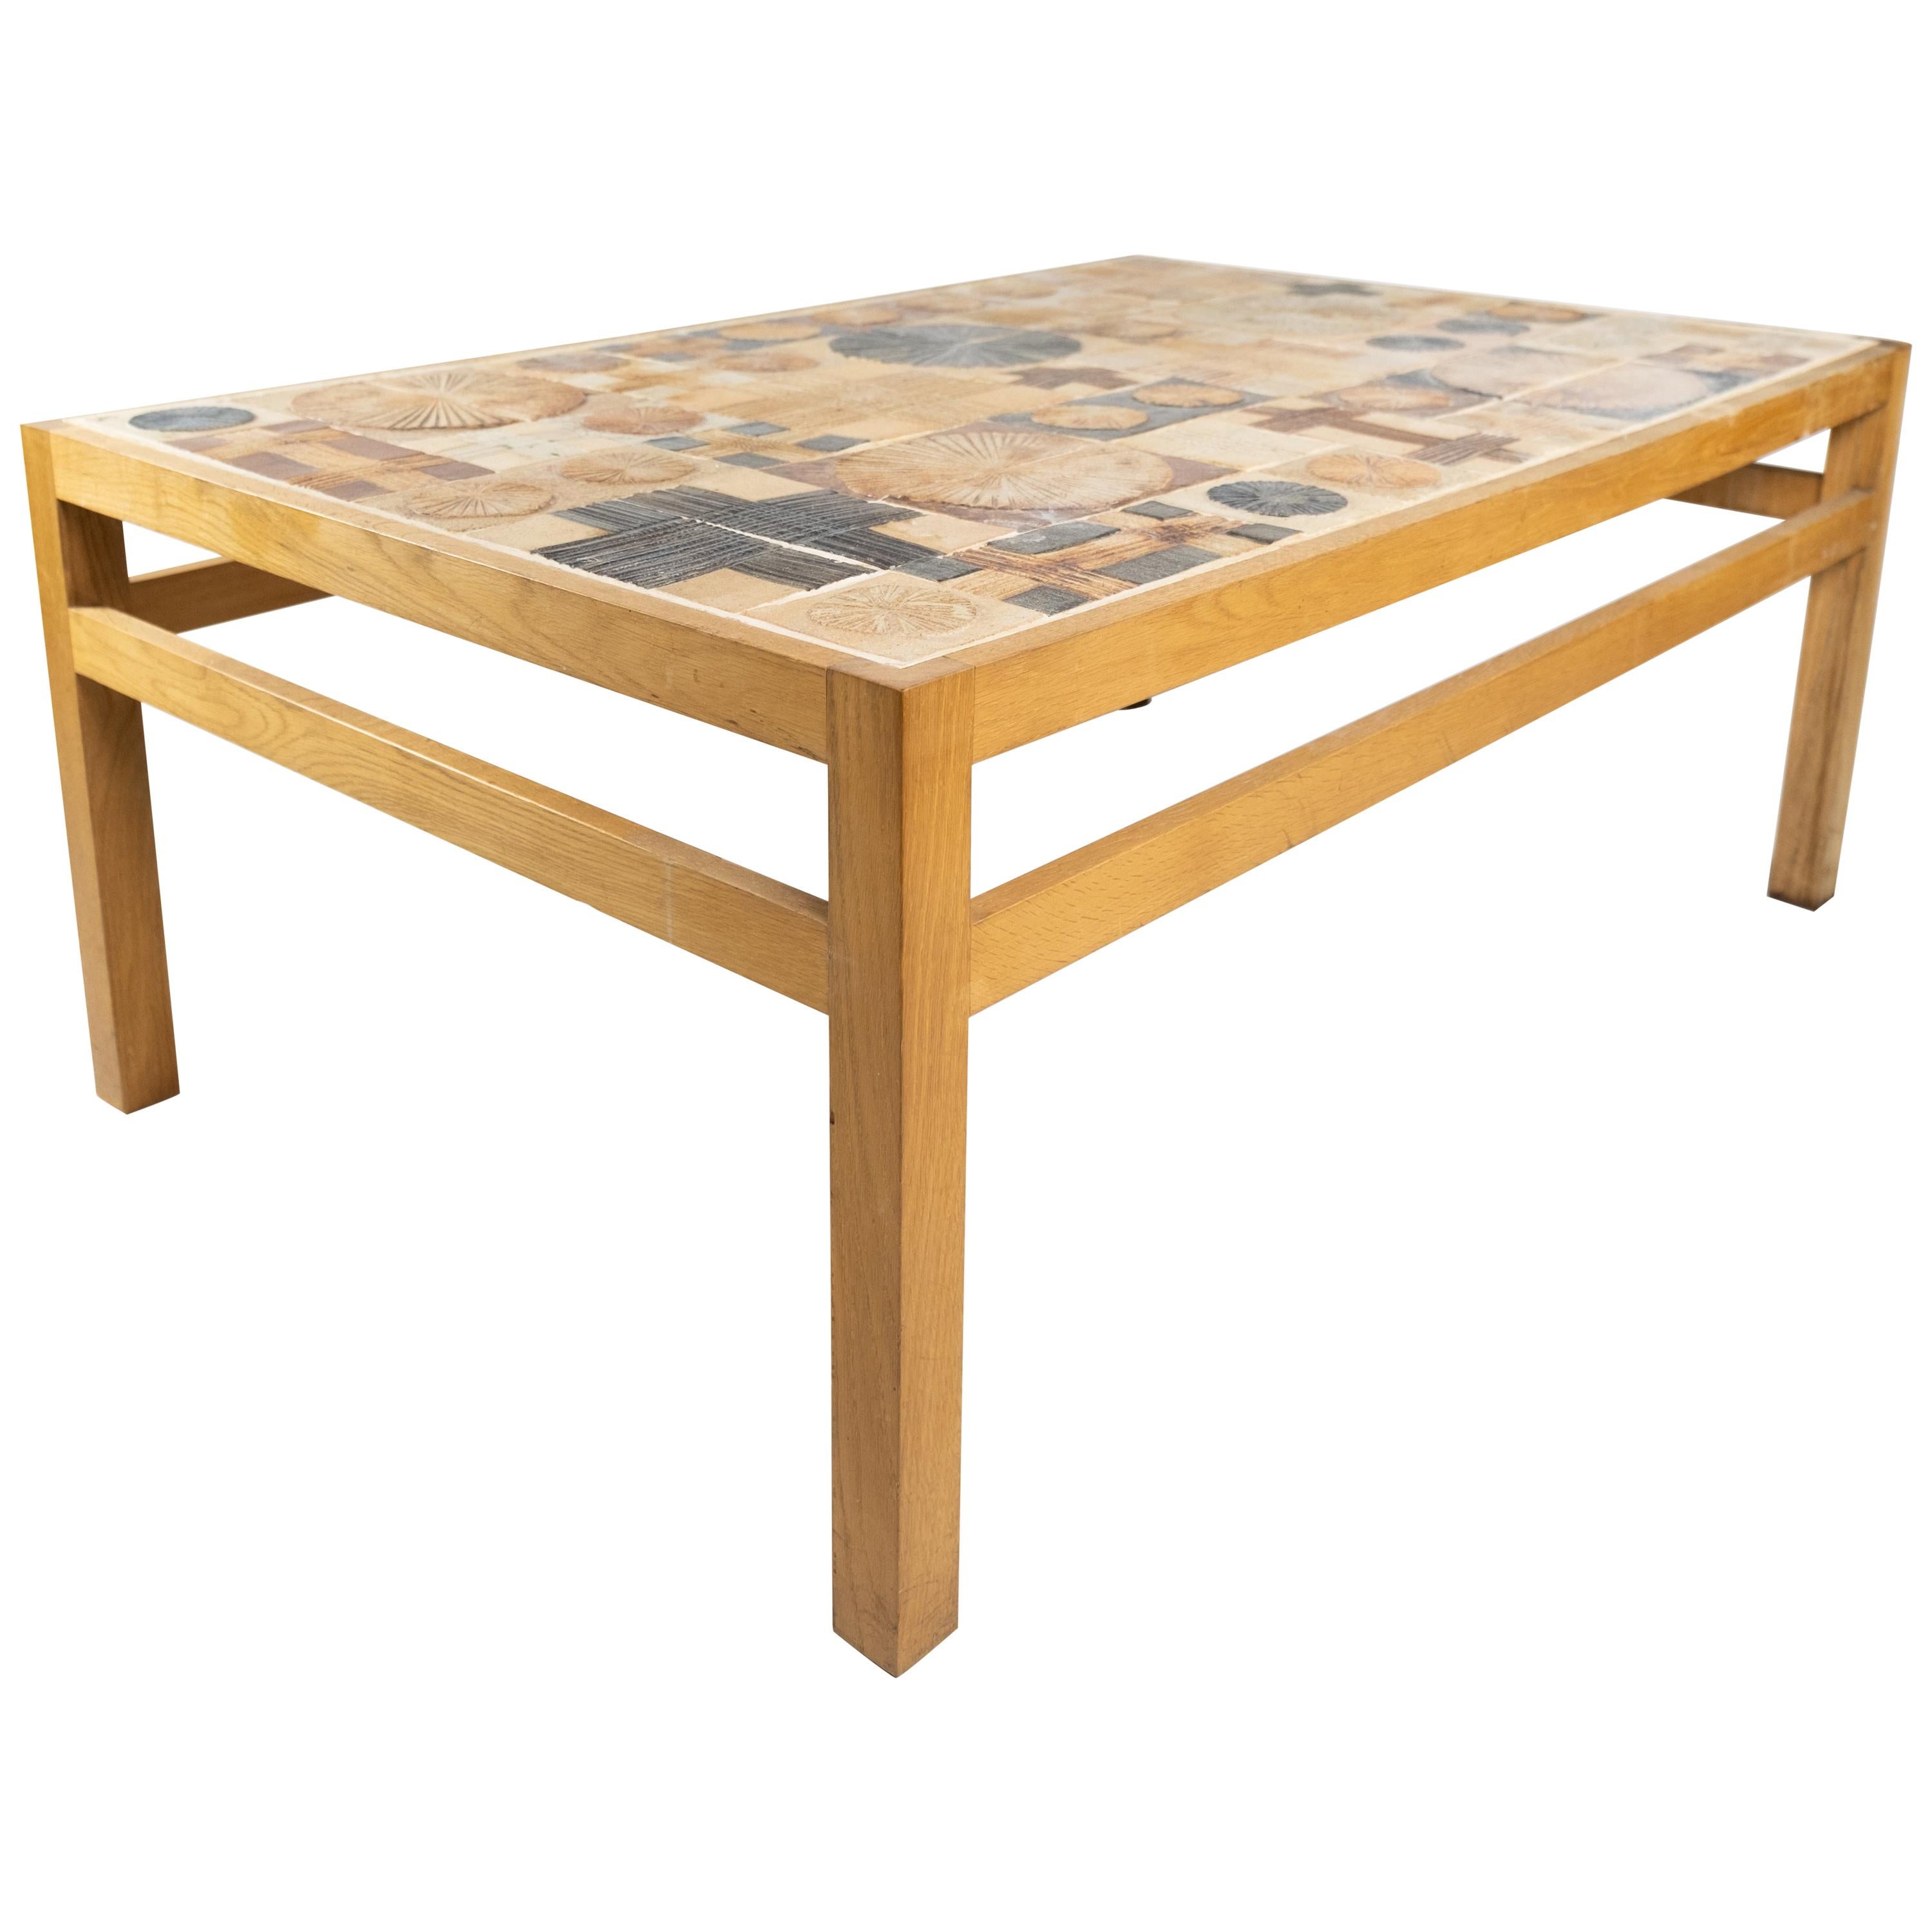 Coffee Table in Oak and with Different Tiles, Designed by Tue Poulsen, 1970s